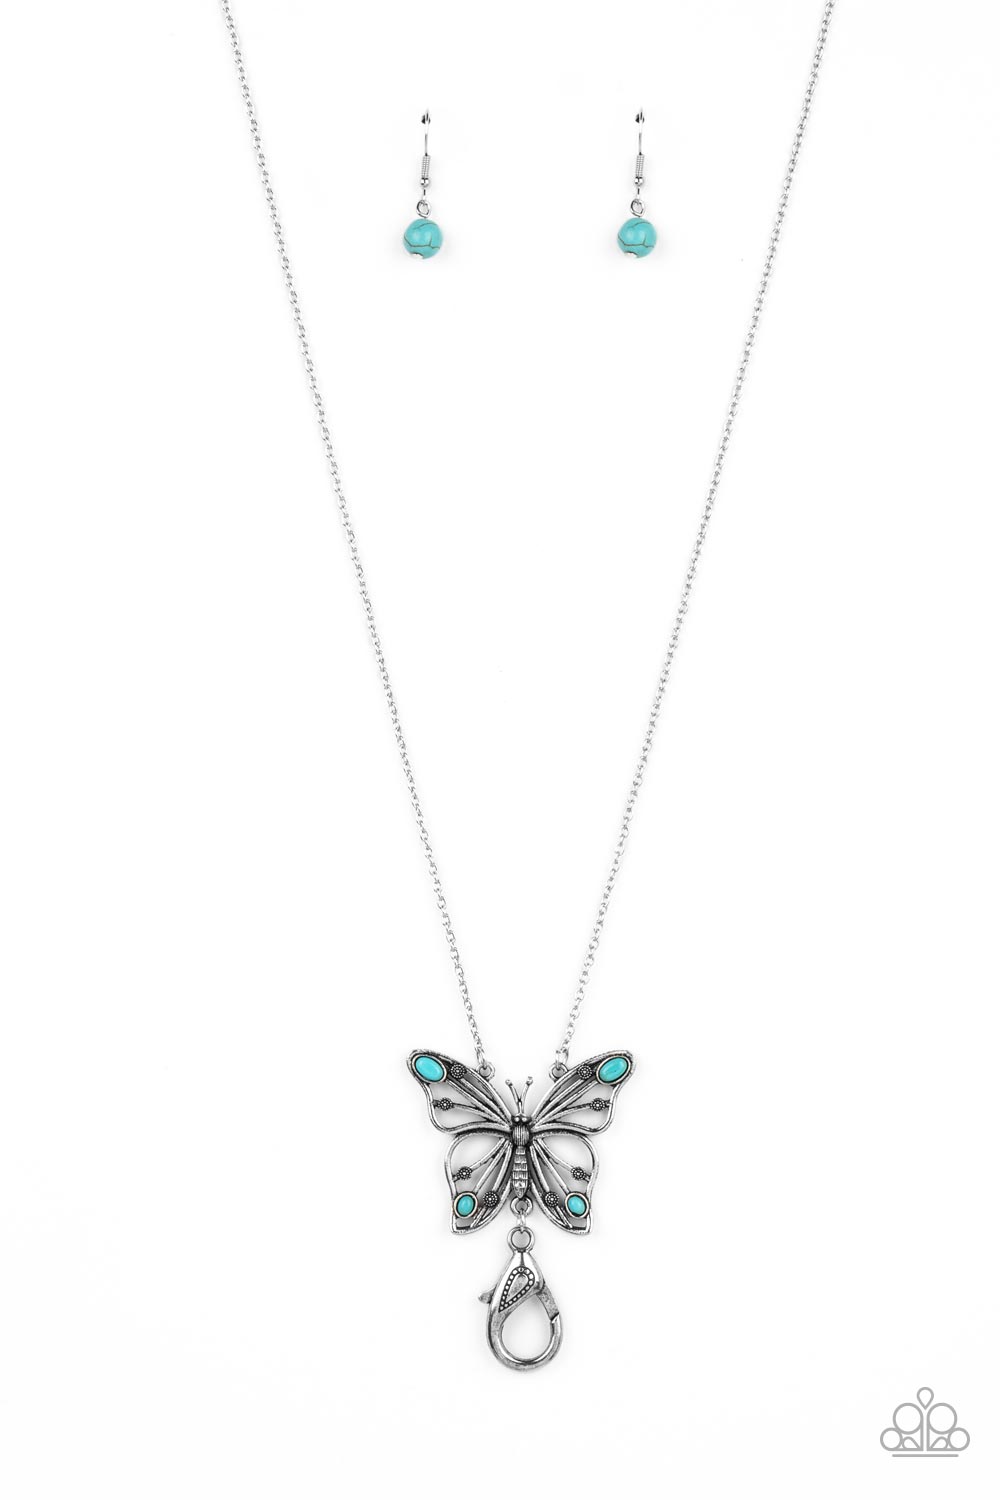 Paparazzi Accessories Badlands Butterfly - Blue *Lanyard Accented in oval turquoise stones, a decorative silver butterfly flutters at the bottom of a silver chain for a free-spirited finish. A lobster clasp hangs from the bottom of the design to allow a n